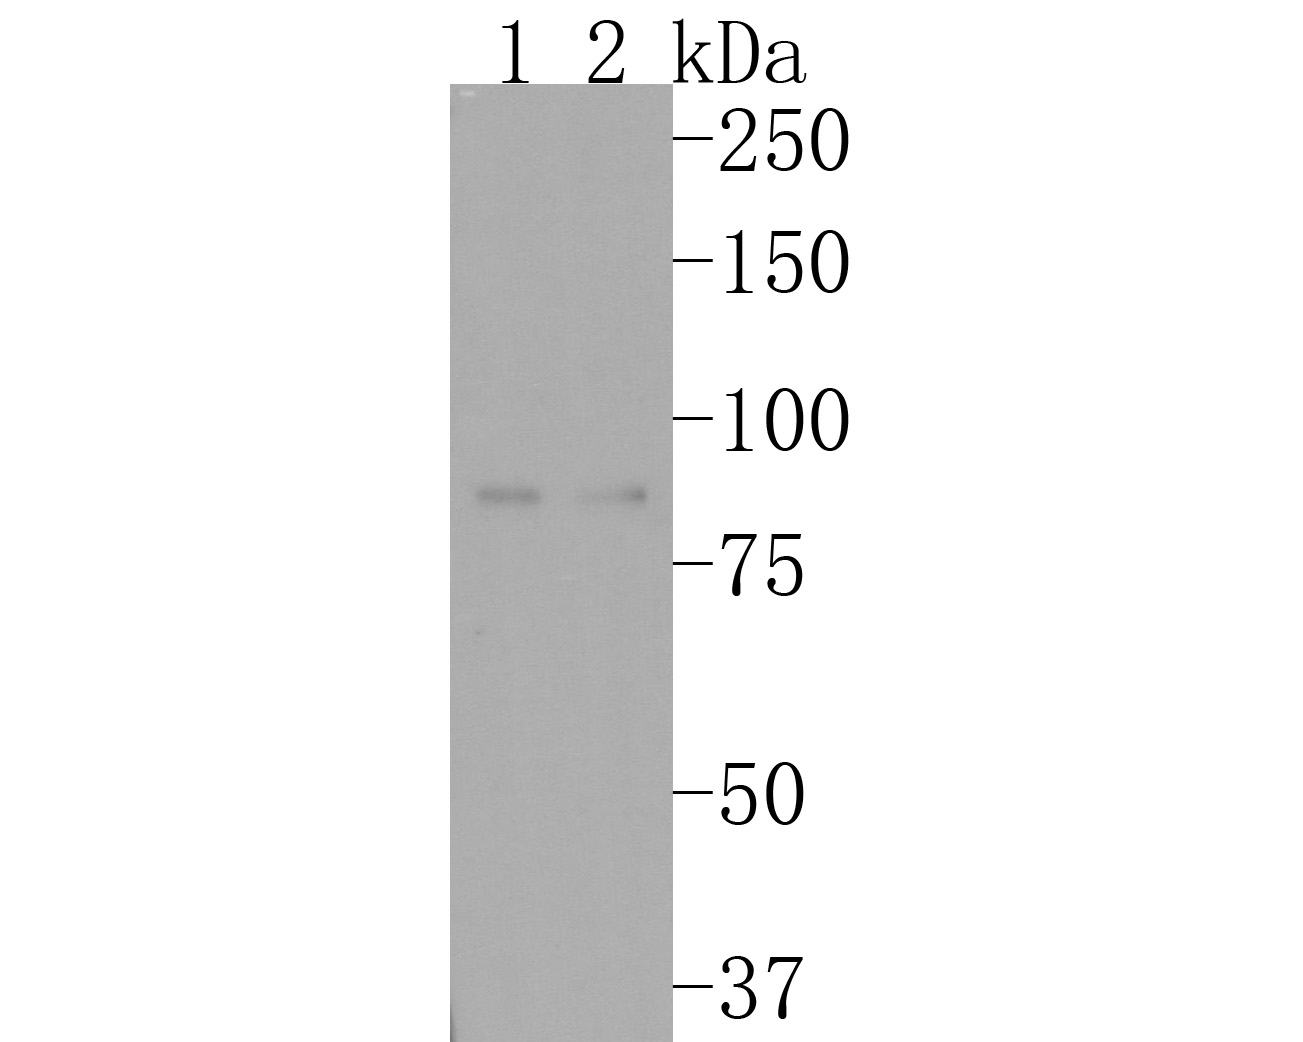 Western blot analysis of CD105 on different lysates. Proteins were transferred to a PVDF membrane and blocked with 5% NFDM/TBST for 1 hour at room temperature. The primary antibody (HA720072, 1/500) was used in 5% NFDM/TBST at room temperature for 2 hours. Goat Anti-Rabbit IgG - HRP Secondary Antibody (HA1001) at 1:200,000 dilution was used for 1 hour at room temperature.<br />
Positive control: <br />
Lane 1: Human placenta tissue lysate<br />
Lane 2: JAR cell lysate